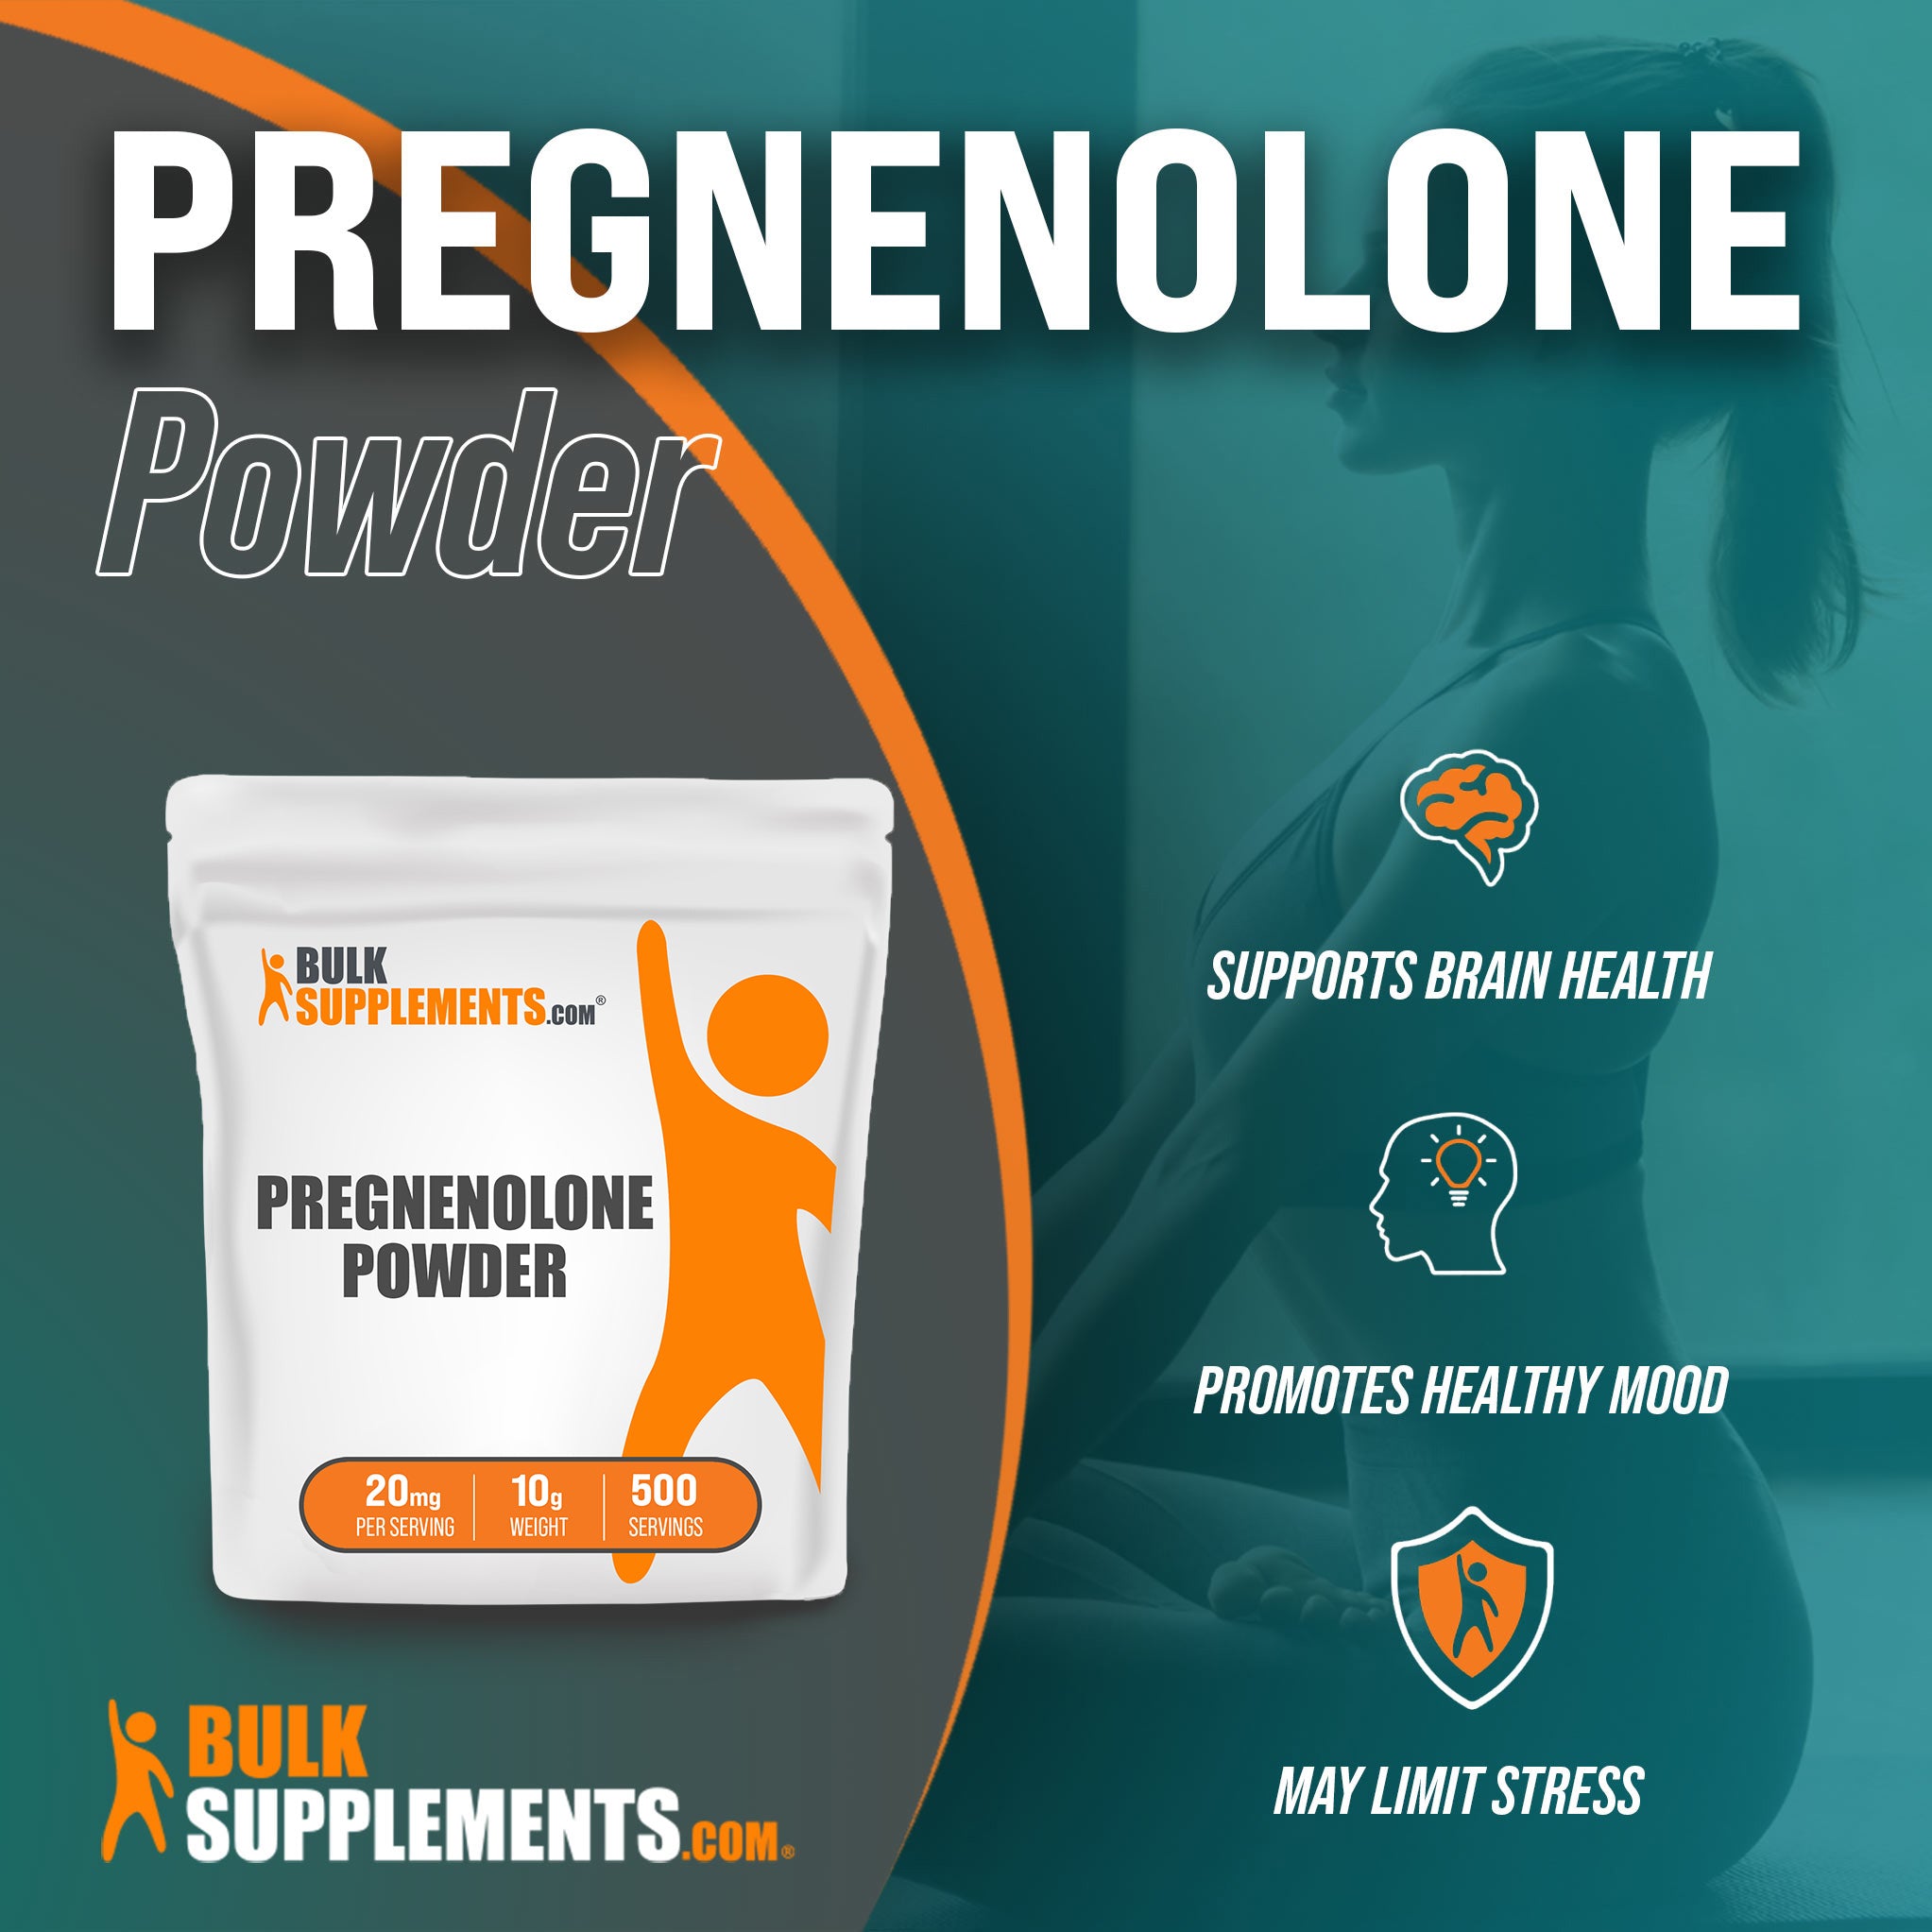 Benefits of Pregnenolone: supports brain health, promotes healthy mood, may limit stress